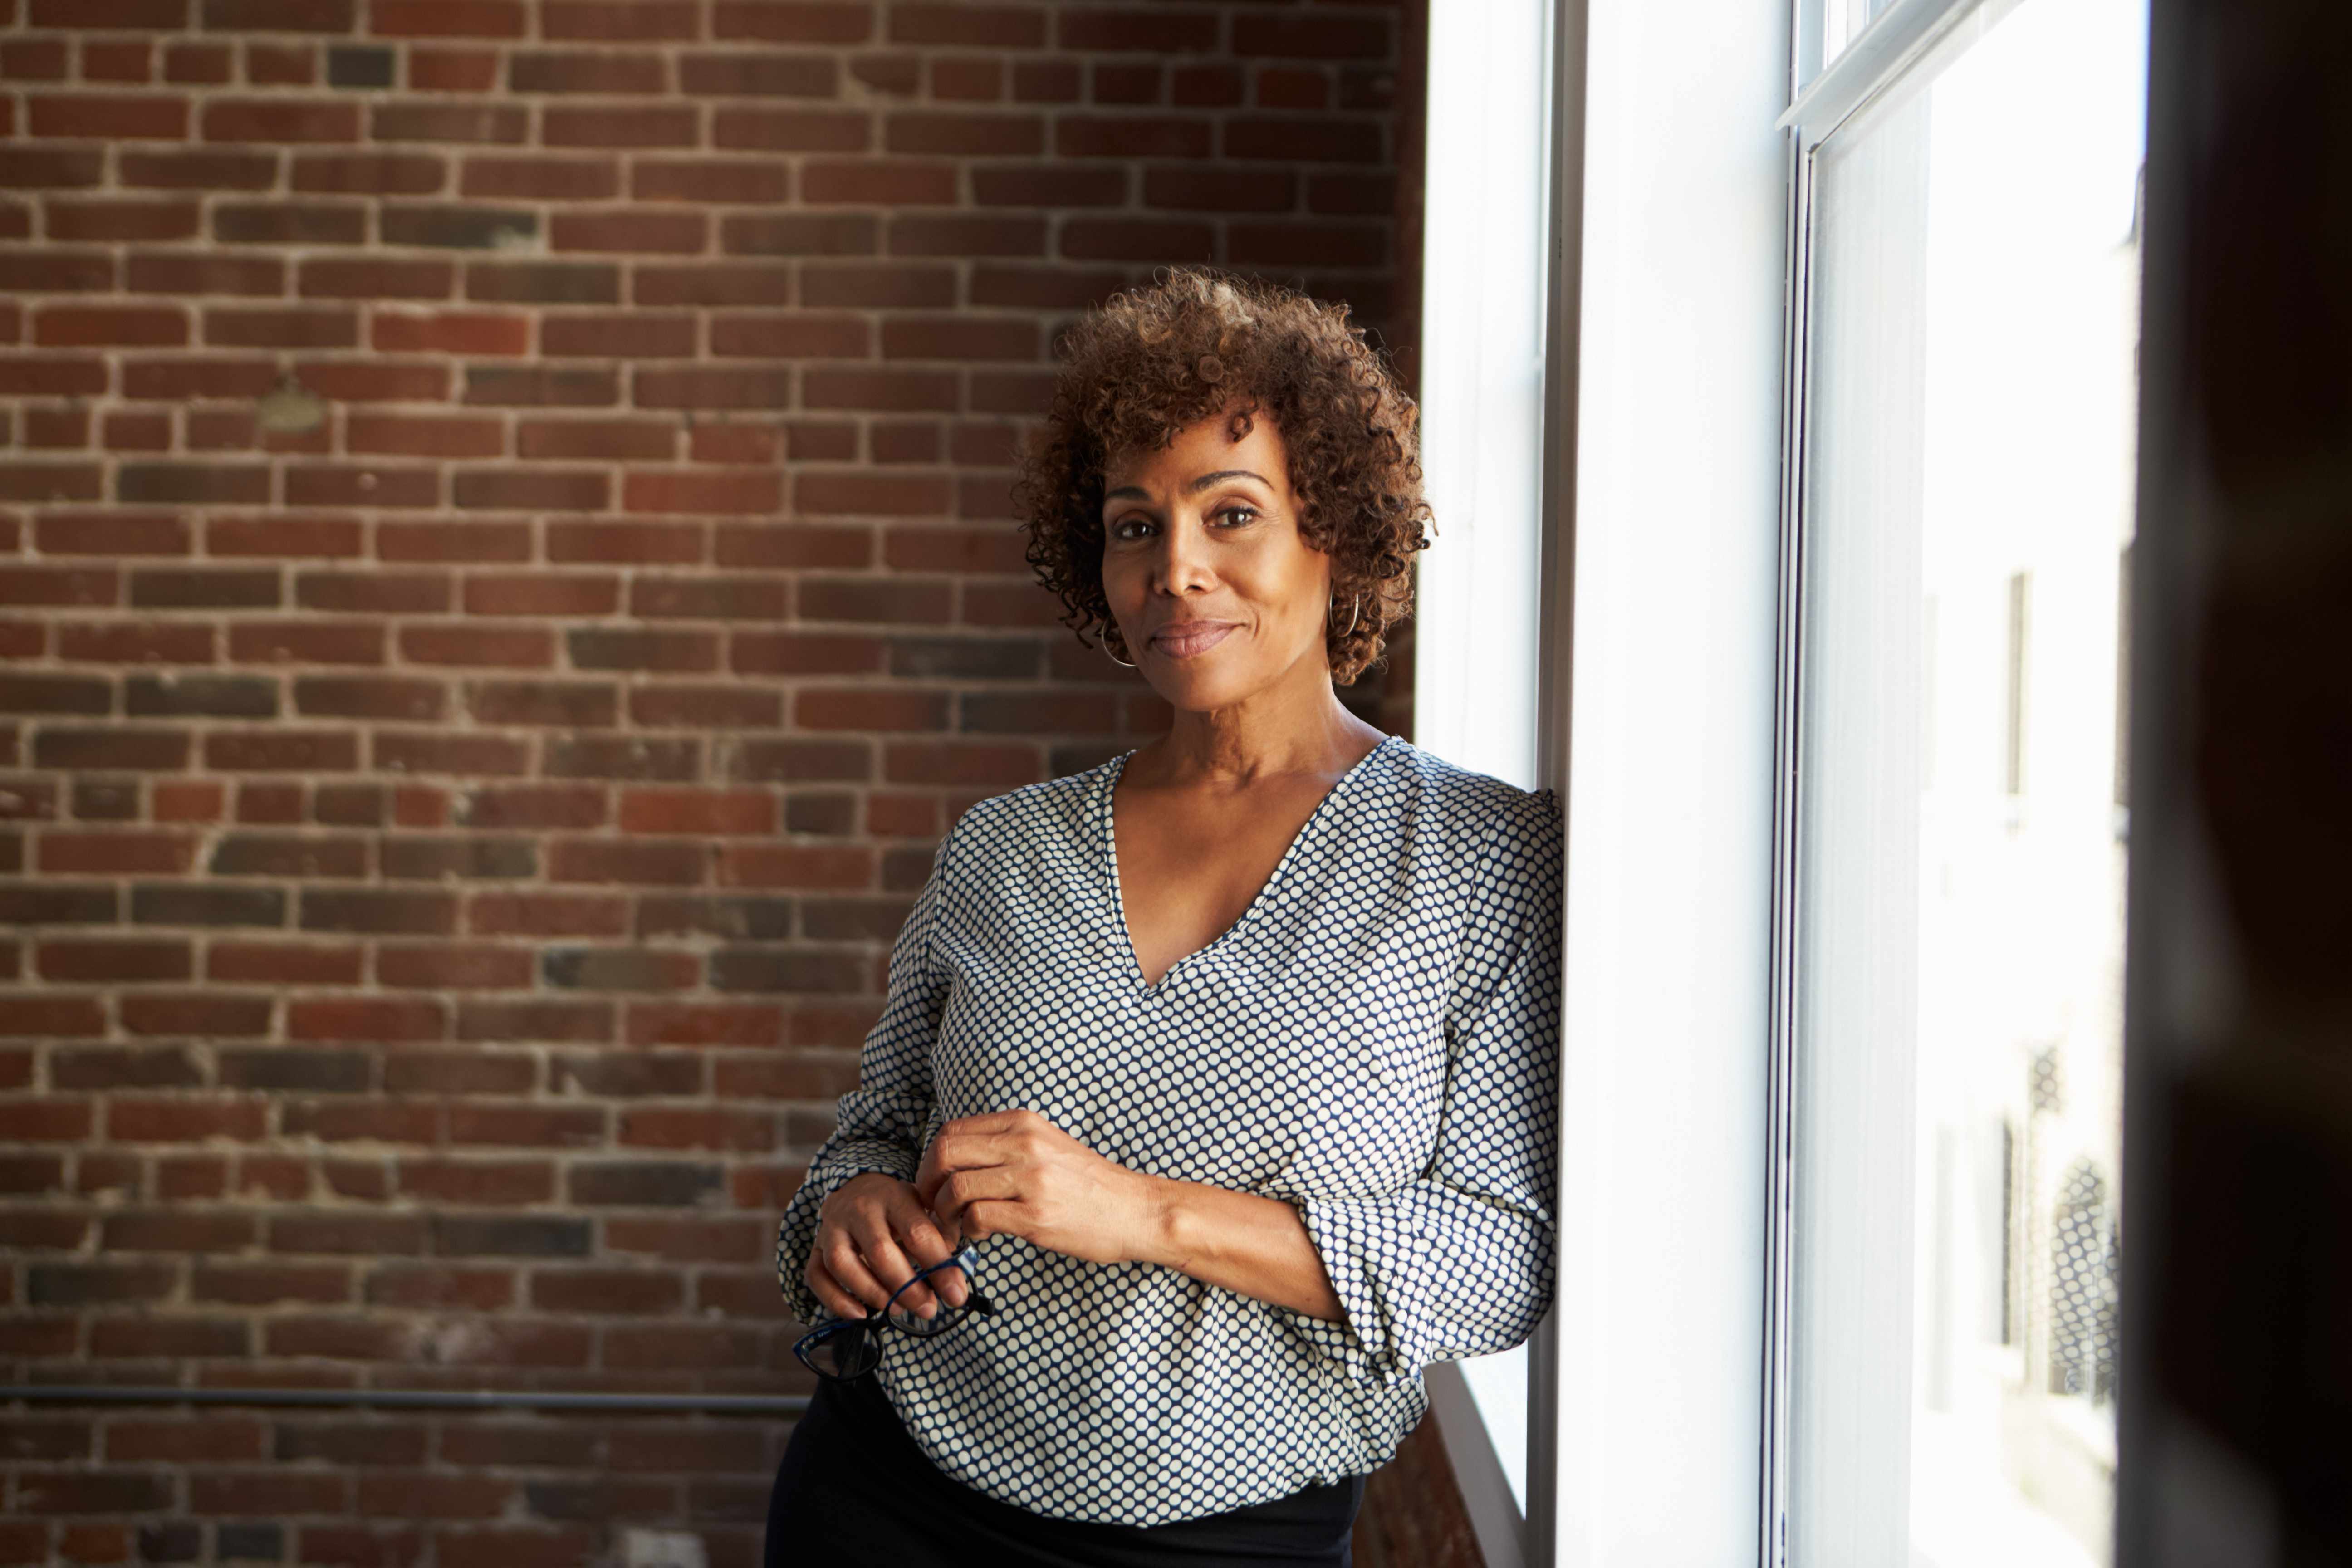 a middled aged African-American woman in casual business outfit, leaning against a window with brick wall in background